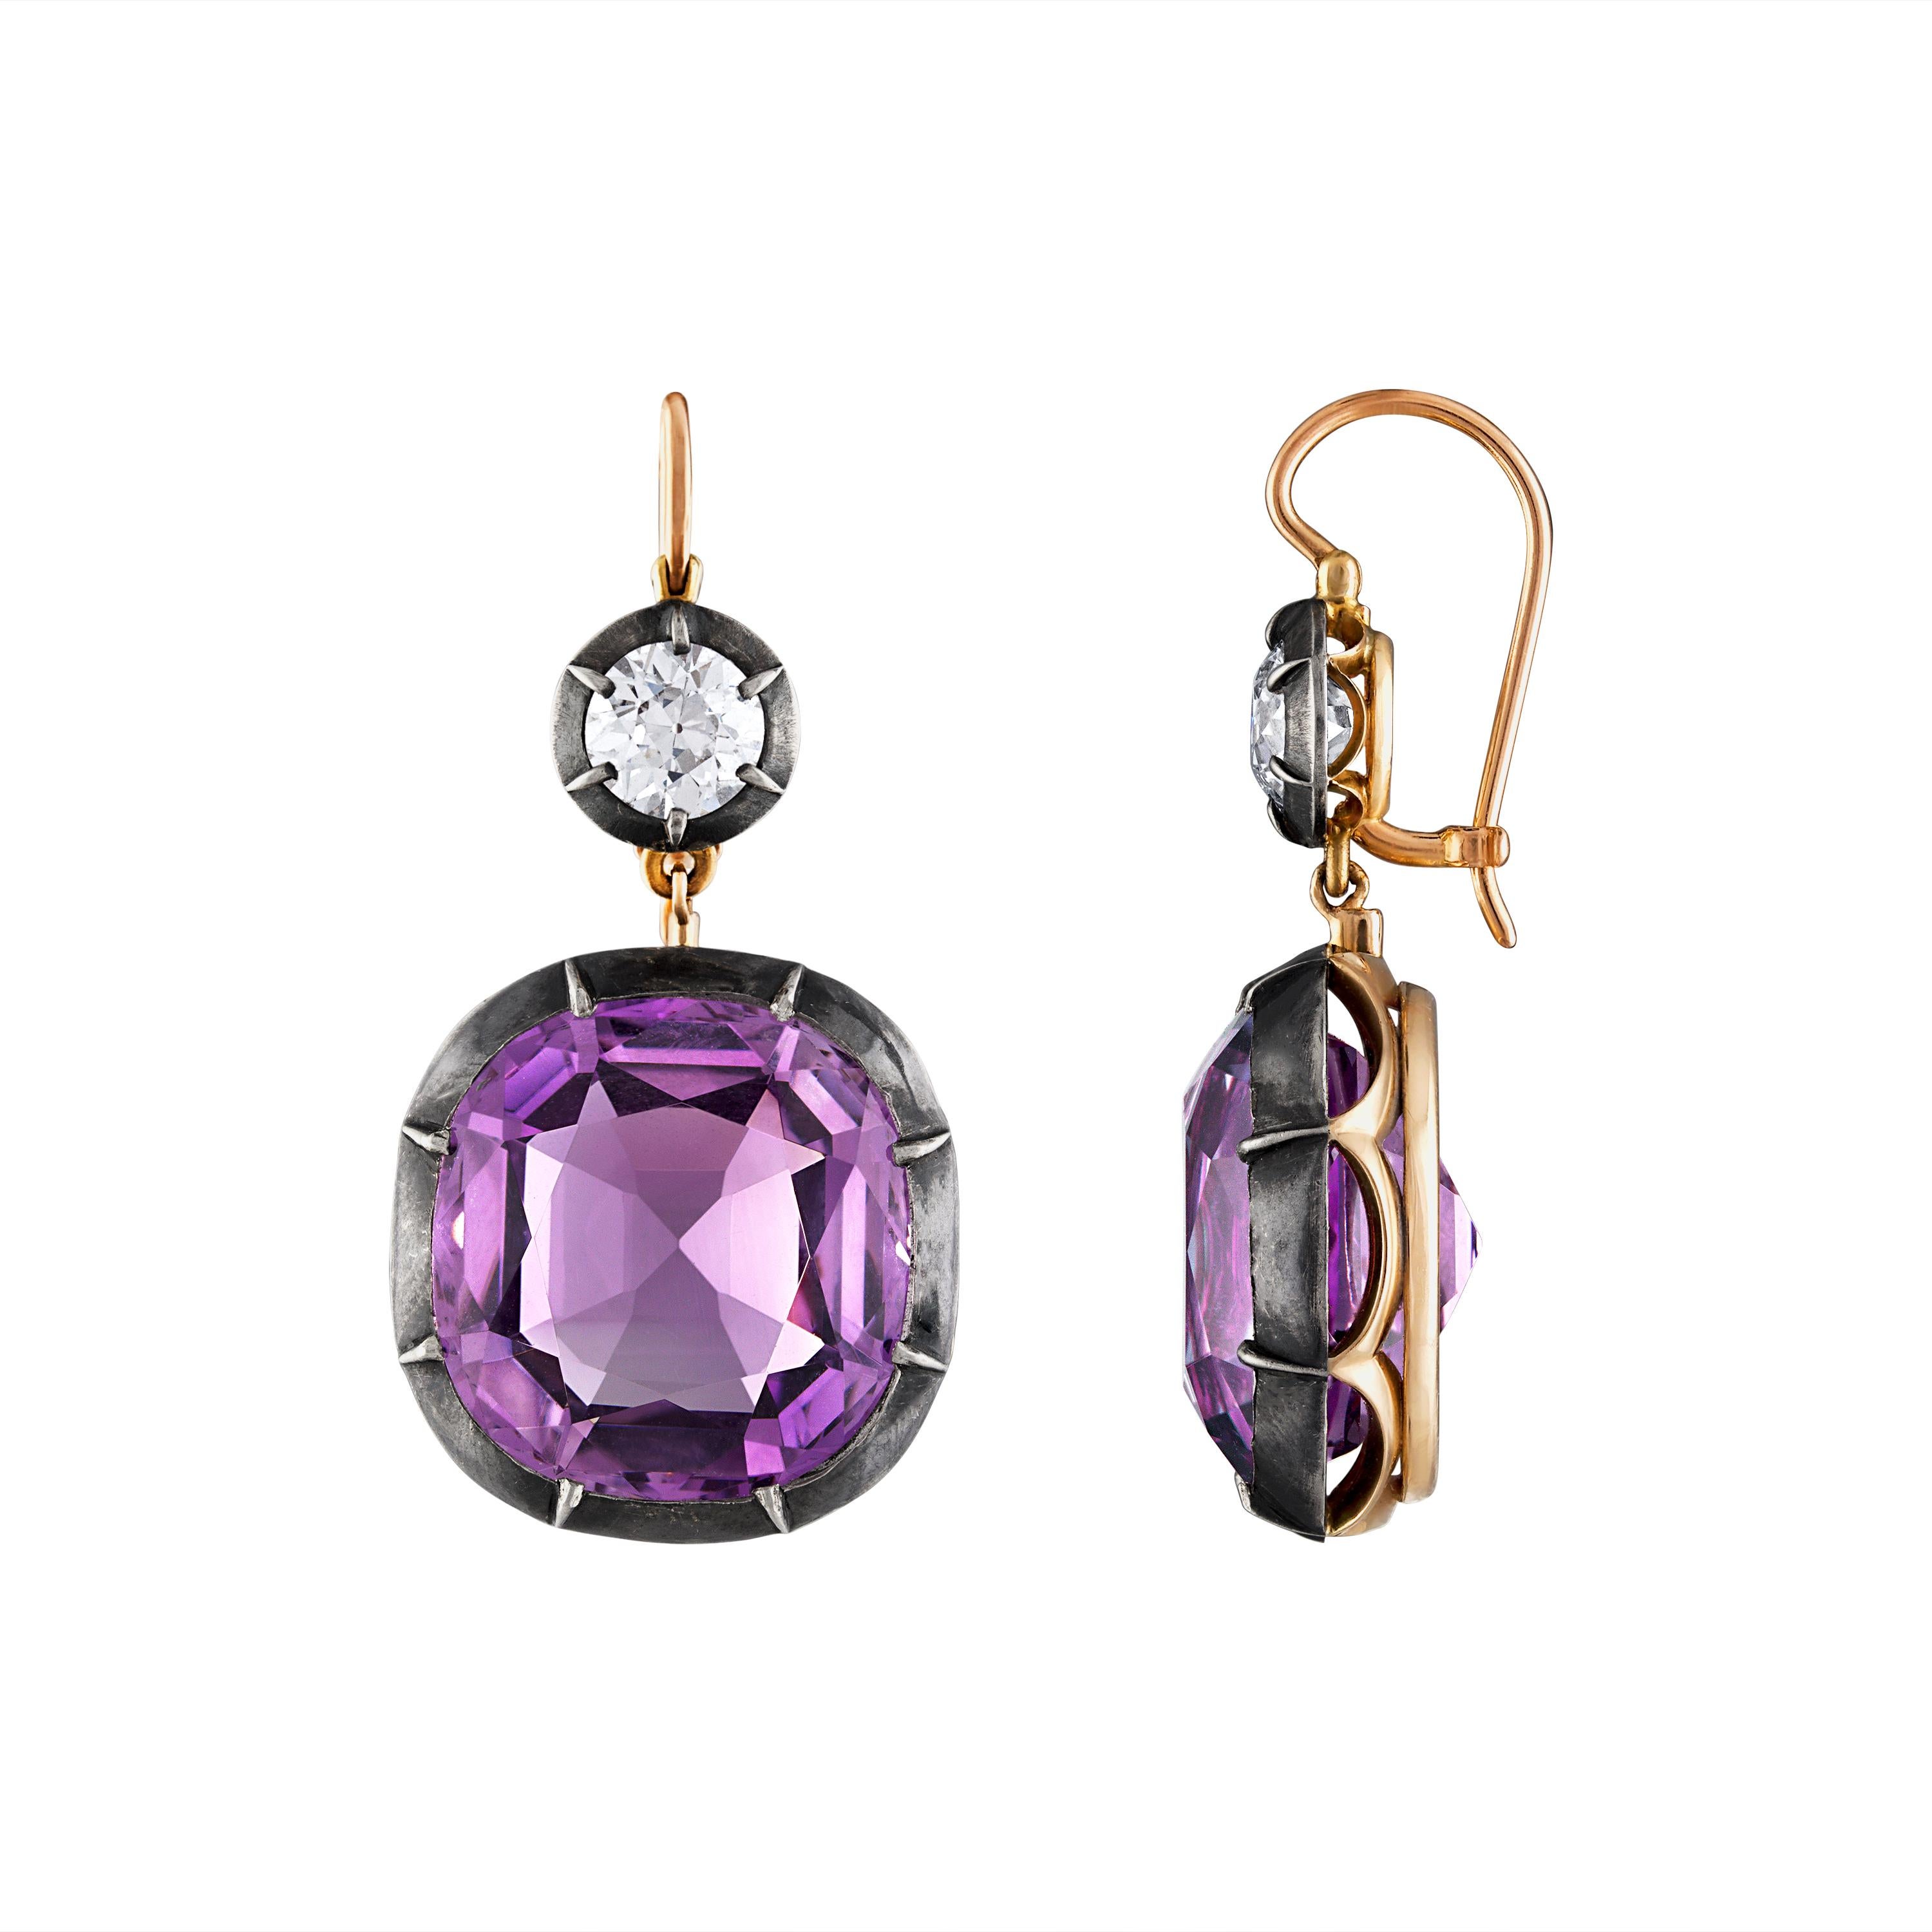 2 large custom antique cut Amethysts and 2 old mine diamonds, approximately 1.60 CTW Diamonds and 32 CTW Amethyst set in a collet Silver-topped Gold mounting.

1-1/2 inch long and 3/4 inch wide.